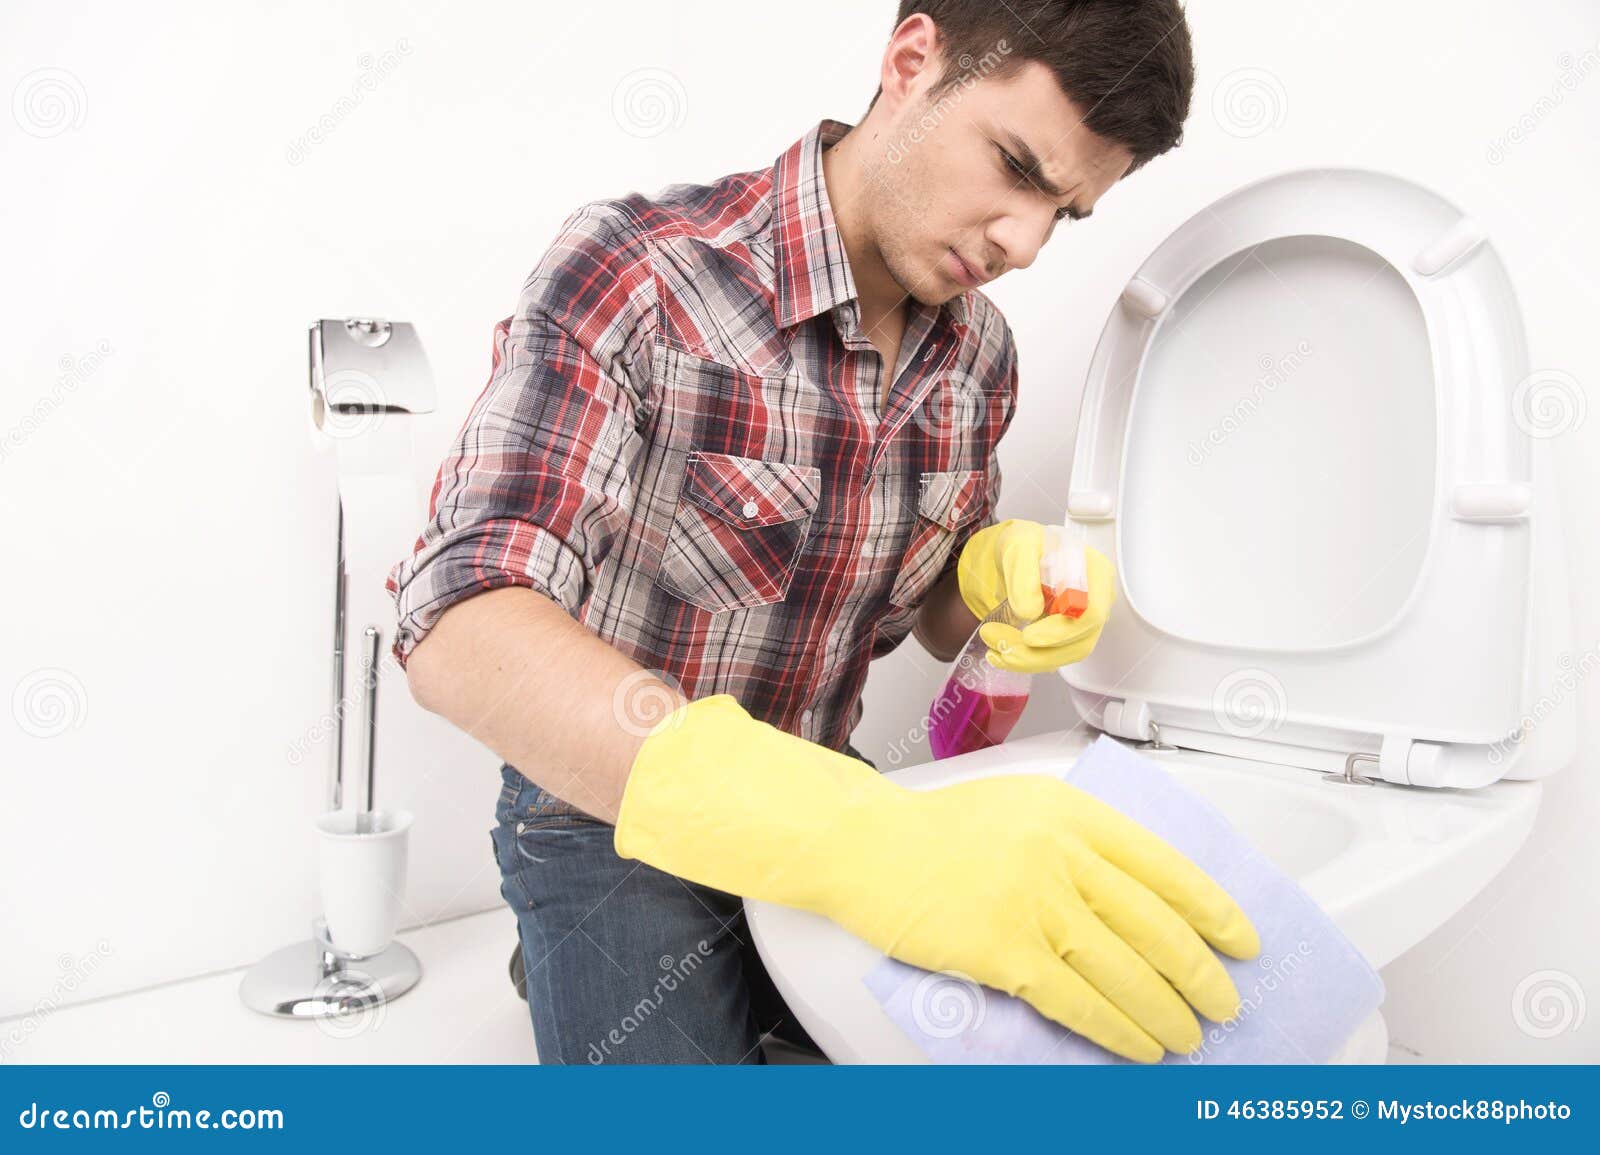 Man Cleaning  Toilet  With Spray Cleaner Stock Photo 